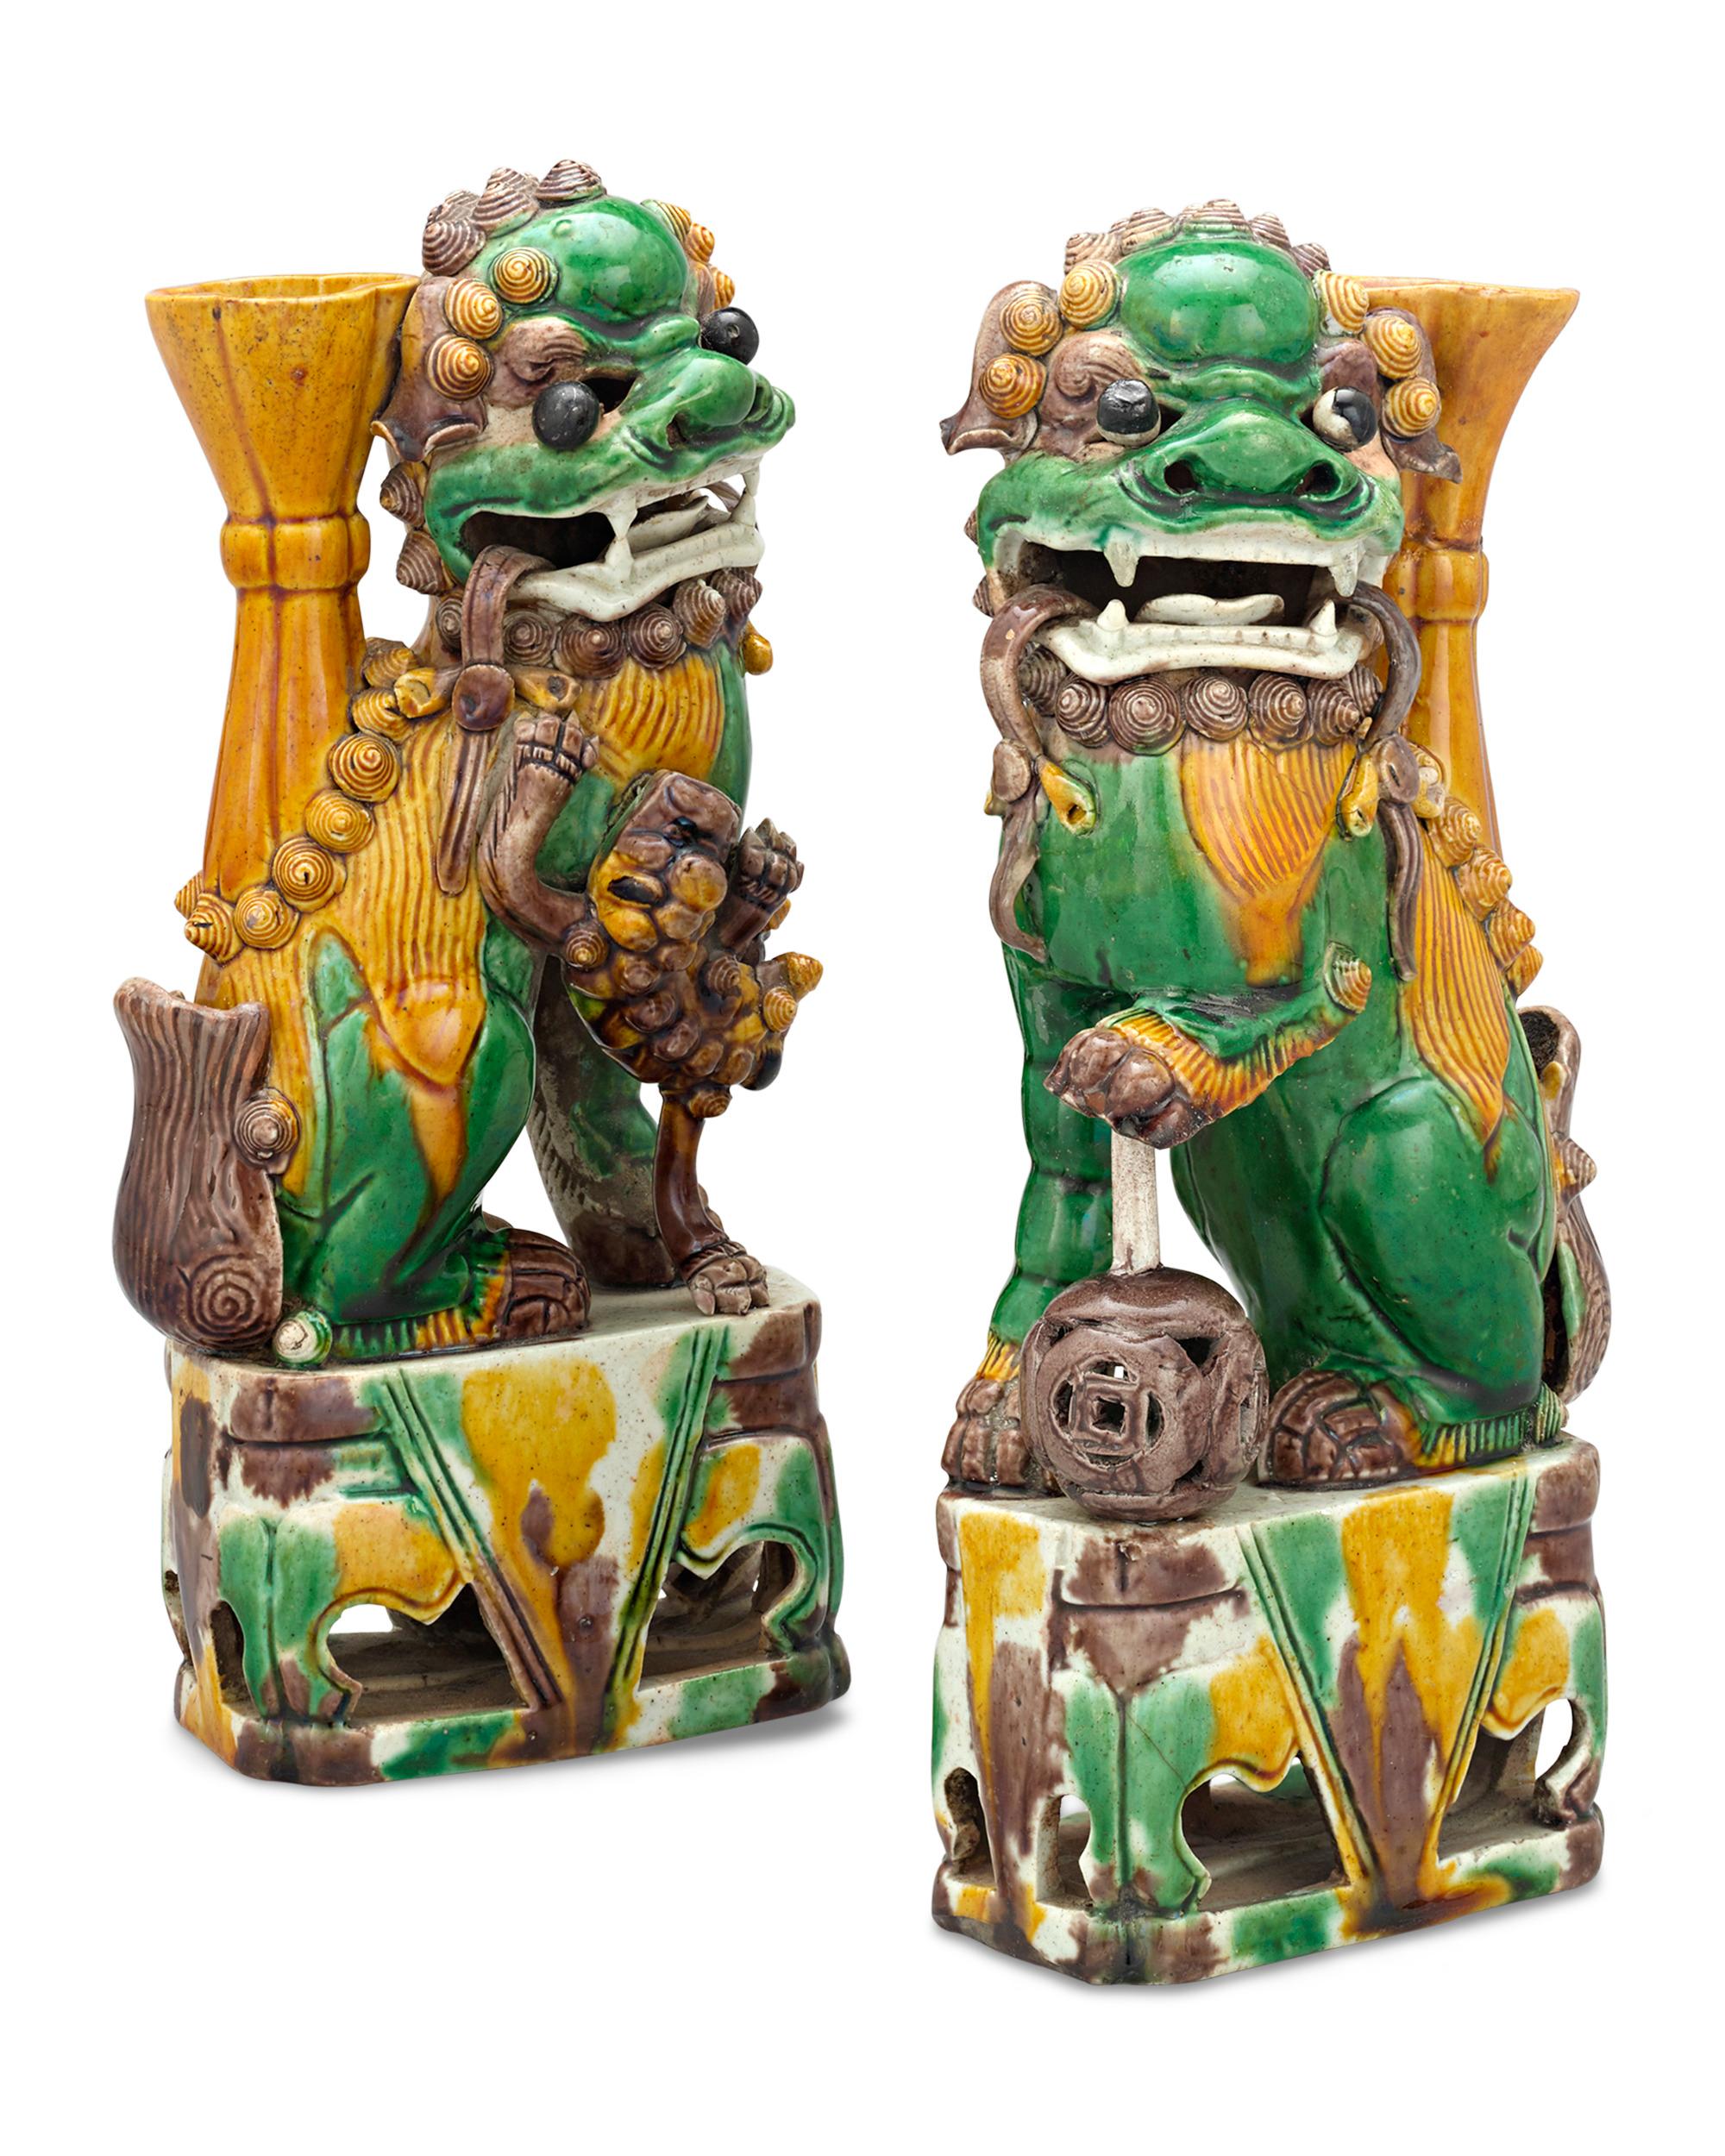 Symbolic of the Chinese concept of yin and yang, this pair of polychrome foo dogs represent totems of protection and prosperity. The female (yin) and male (yang) foo dogs are crafted in the sancai style, a popular type of decoration using glazes in